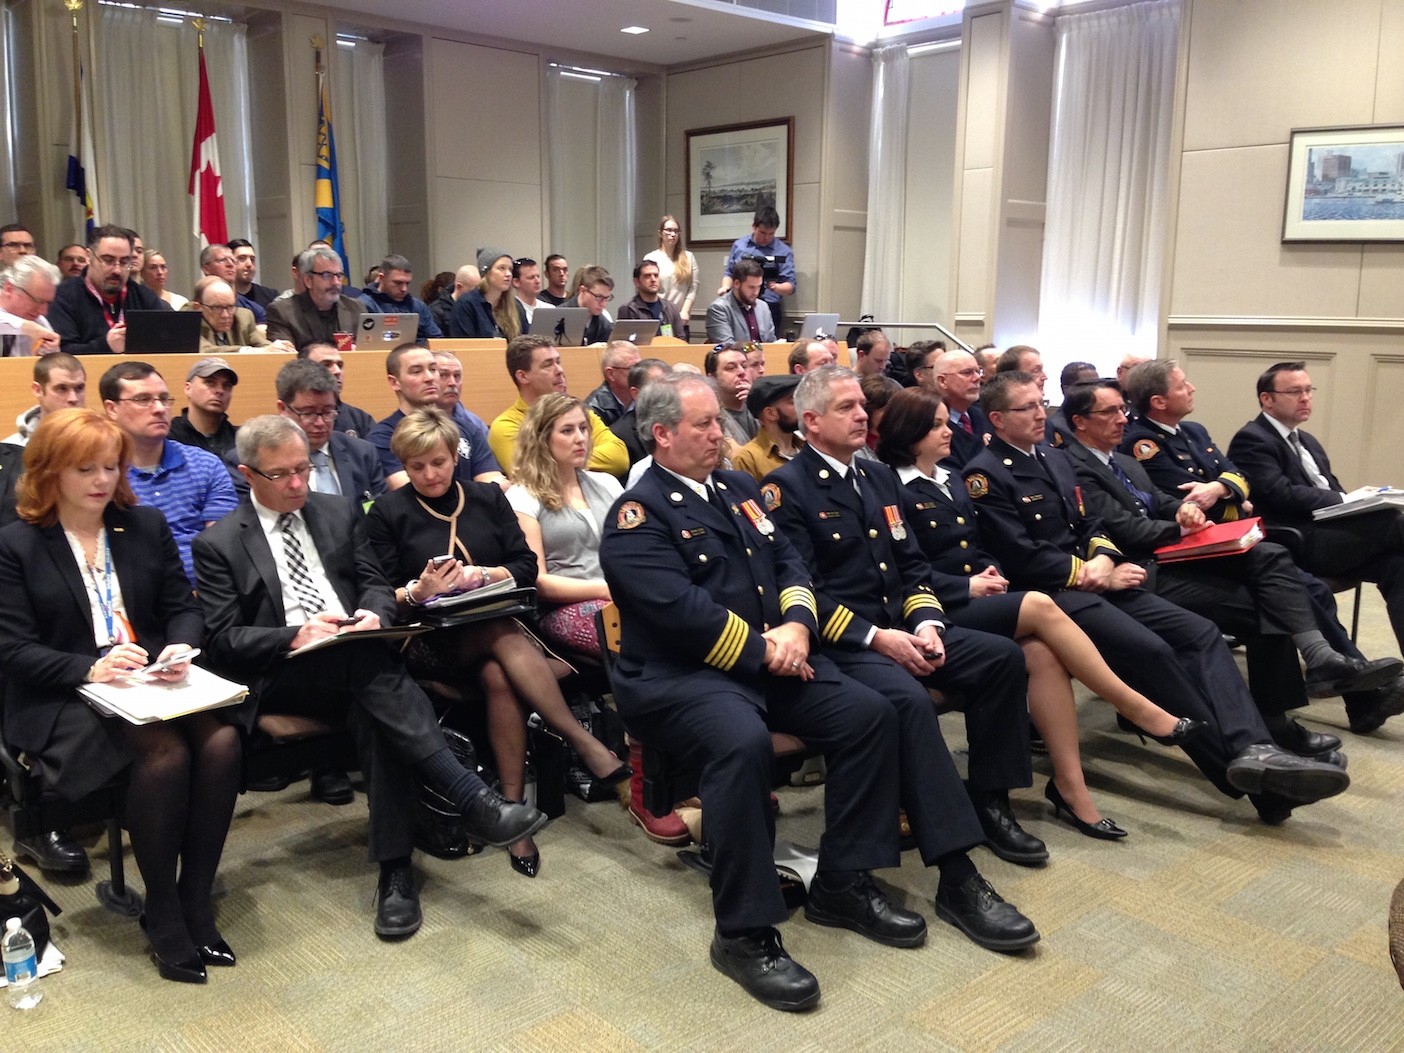 The assembled municipal employees, firefighters, reporters and citizens gathered at council to hear Trussler speak this week. - THE COAST